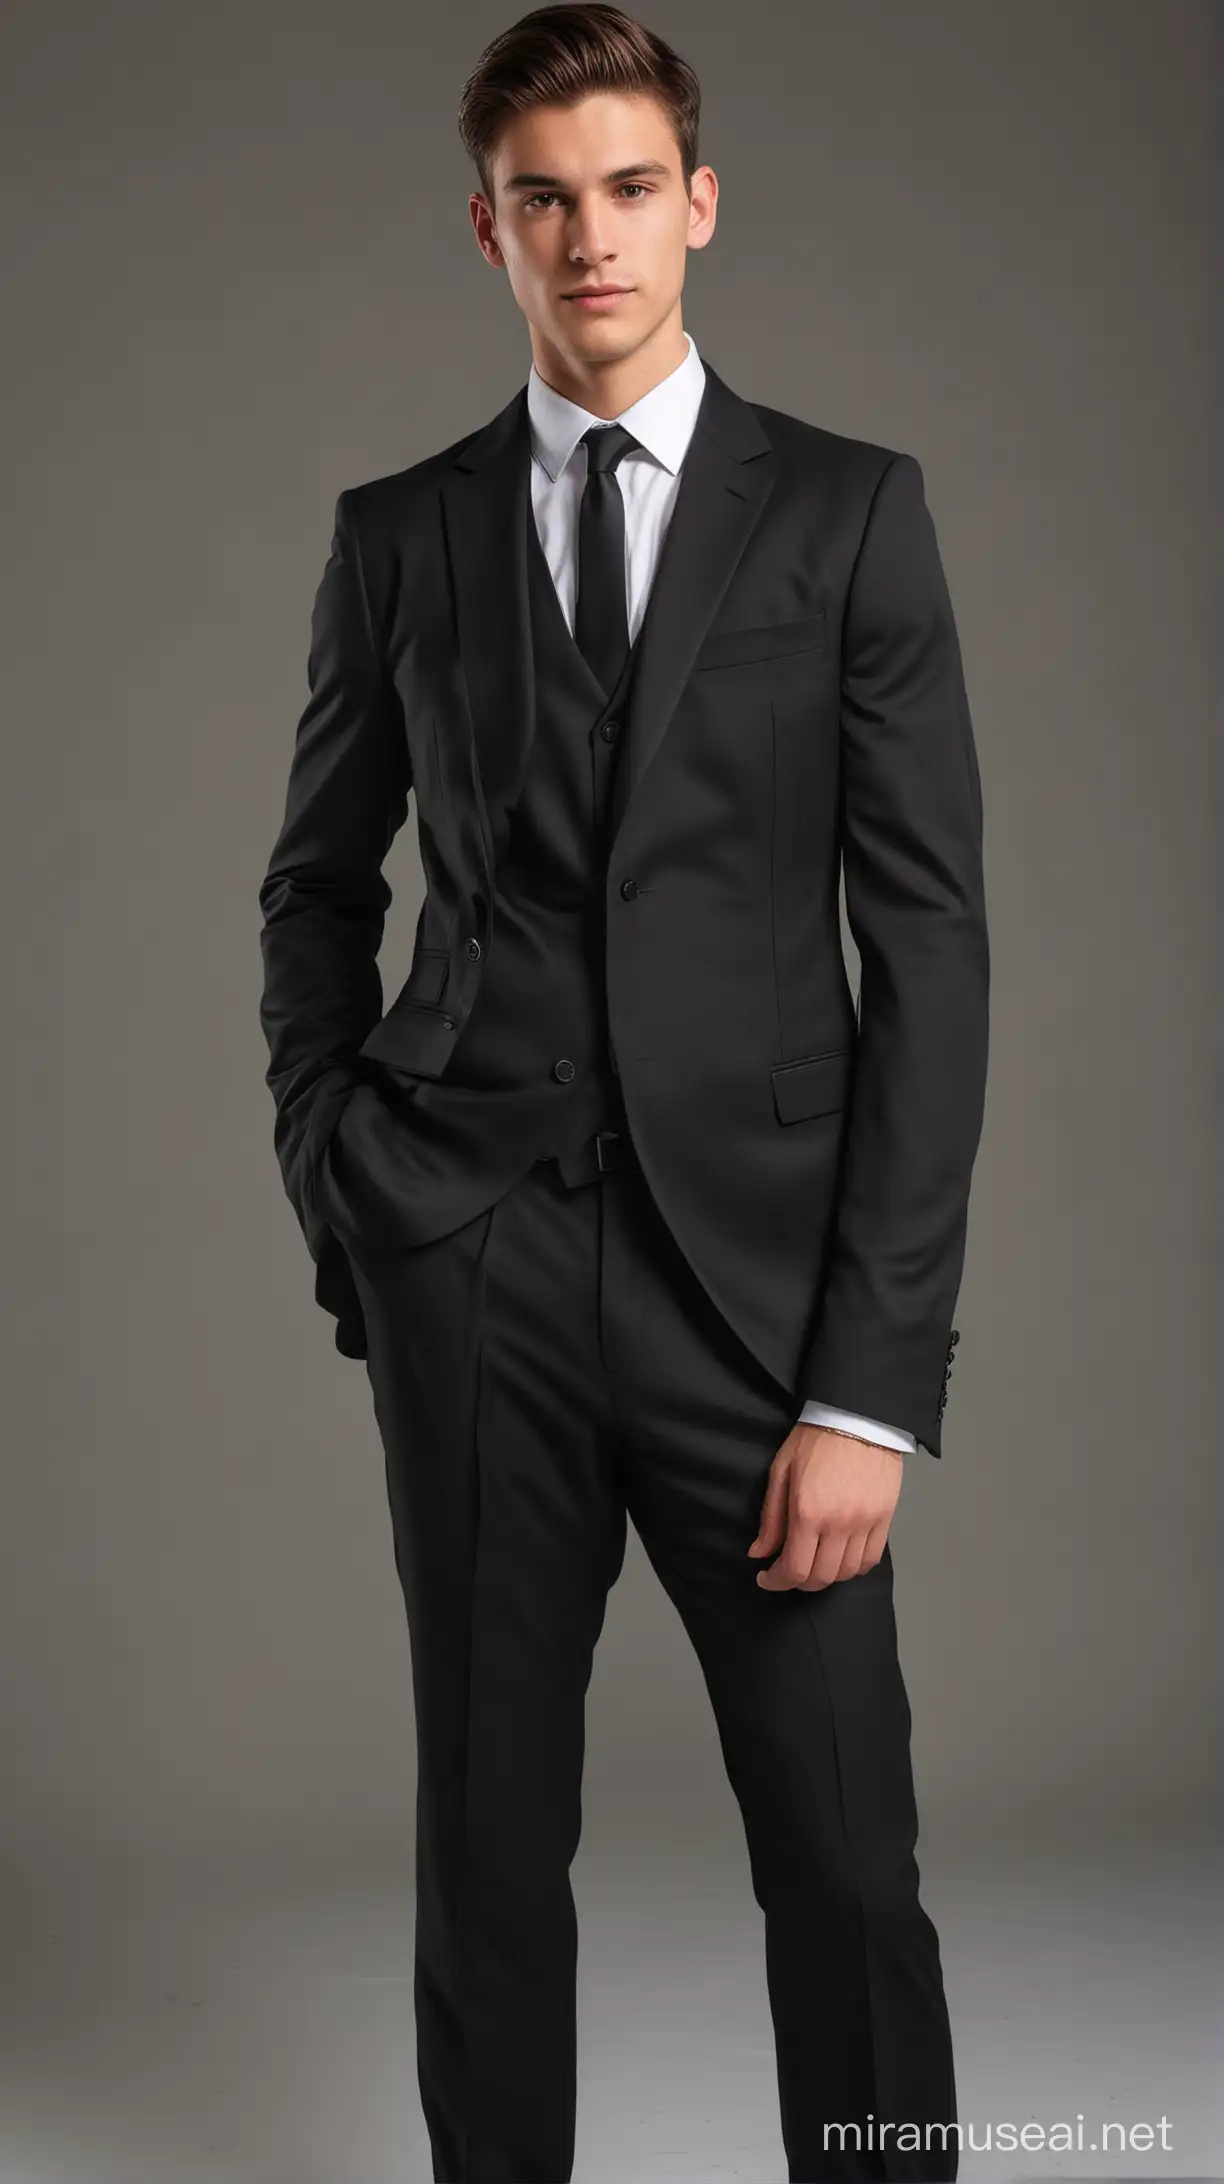 Stylish Young Man in Elegant Black Suit